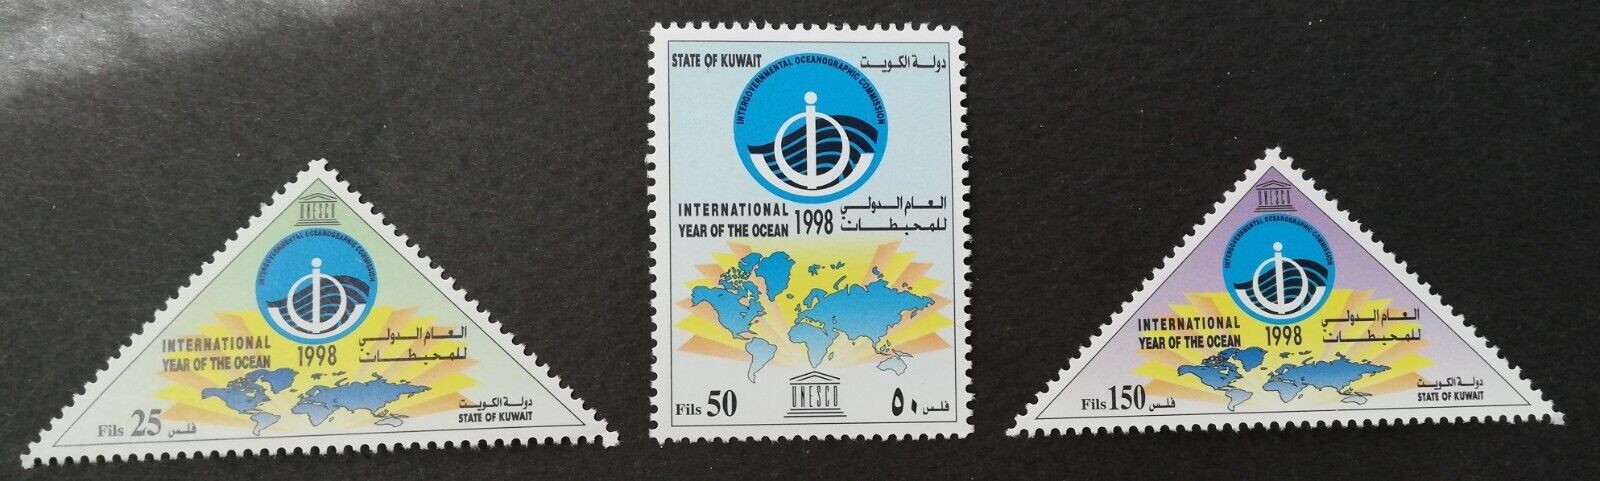 Kuwait 1998 Int. Year Of The Ocean M.n.h.